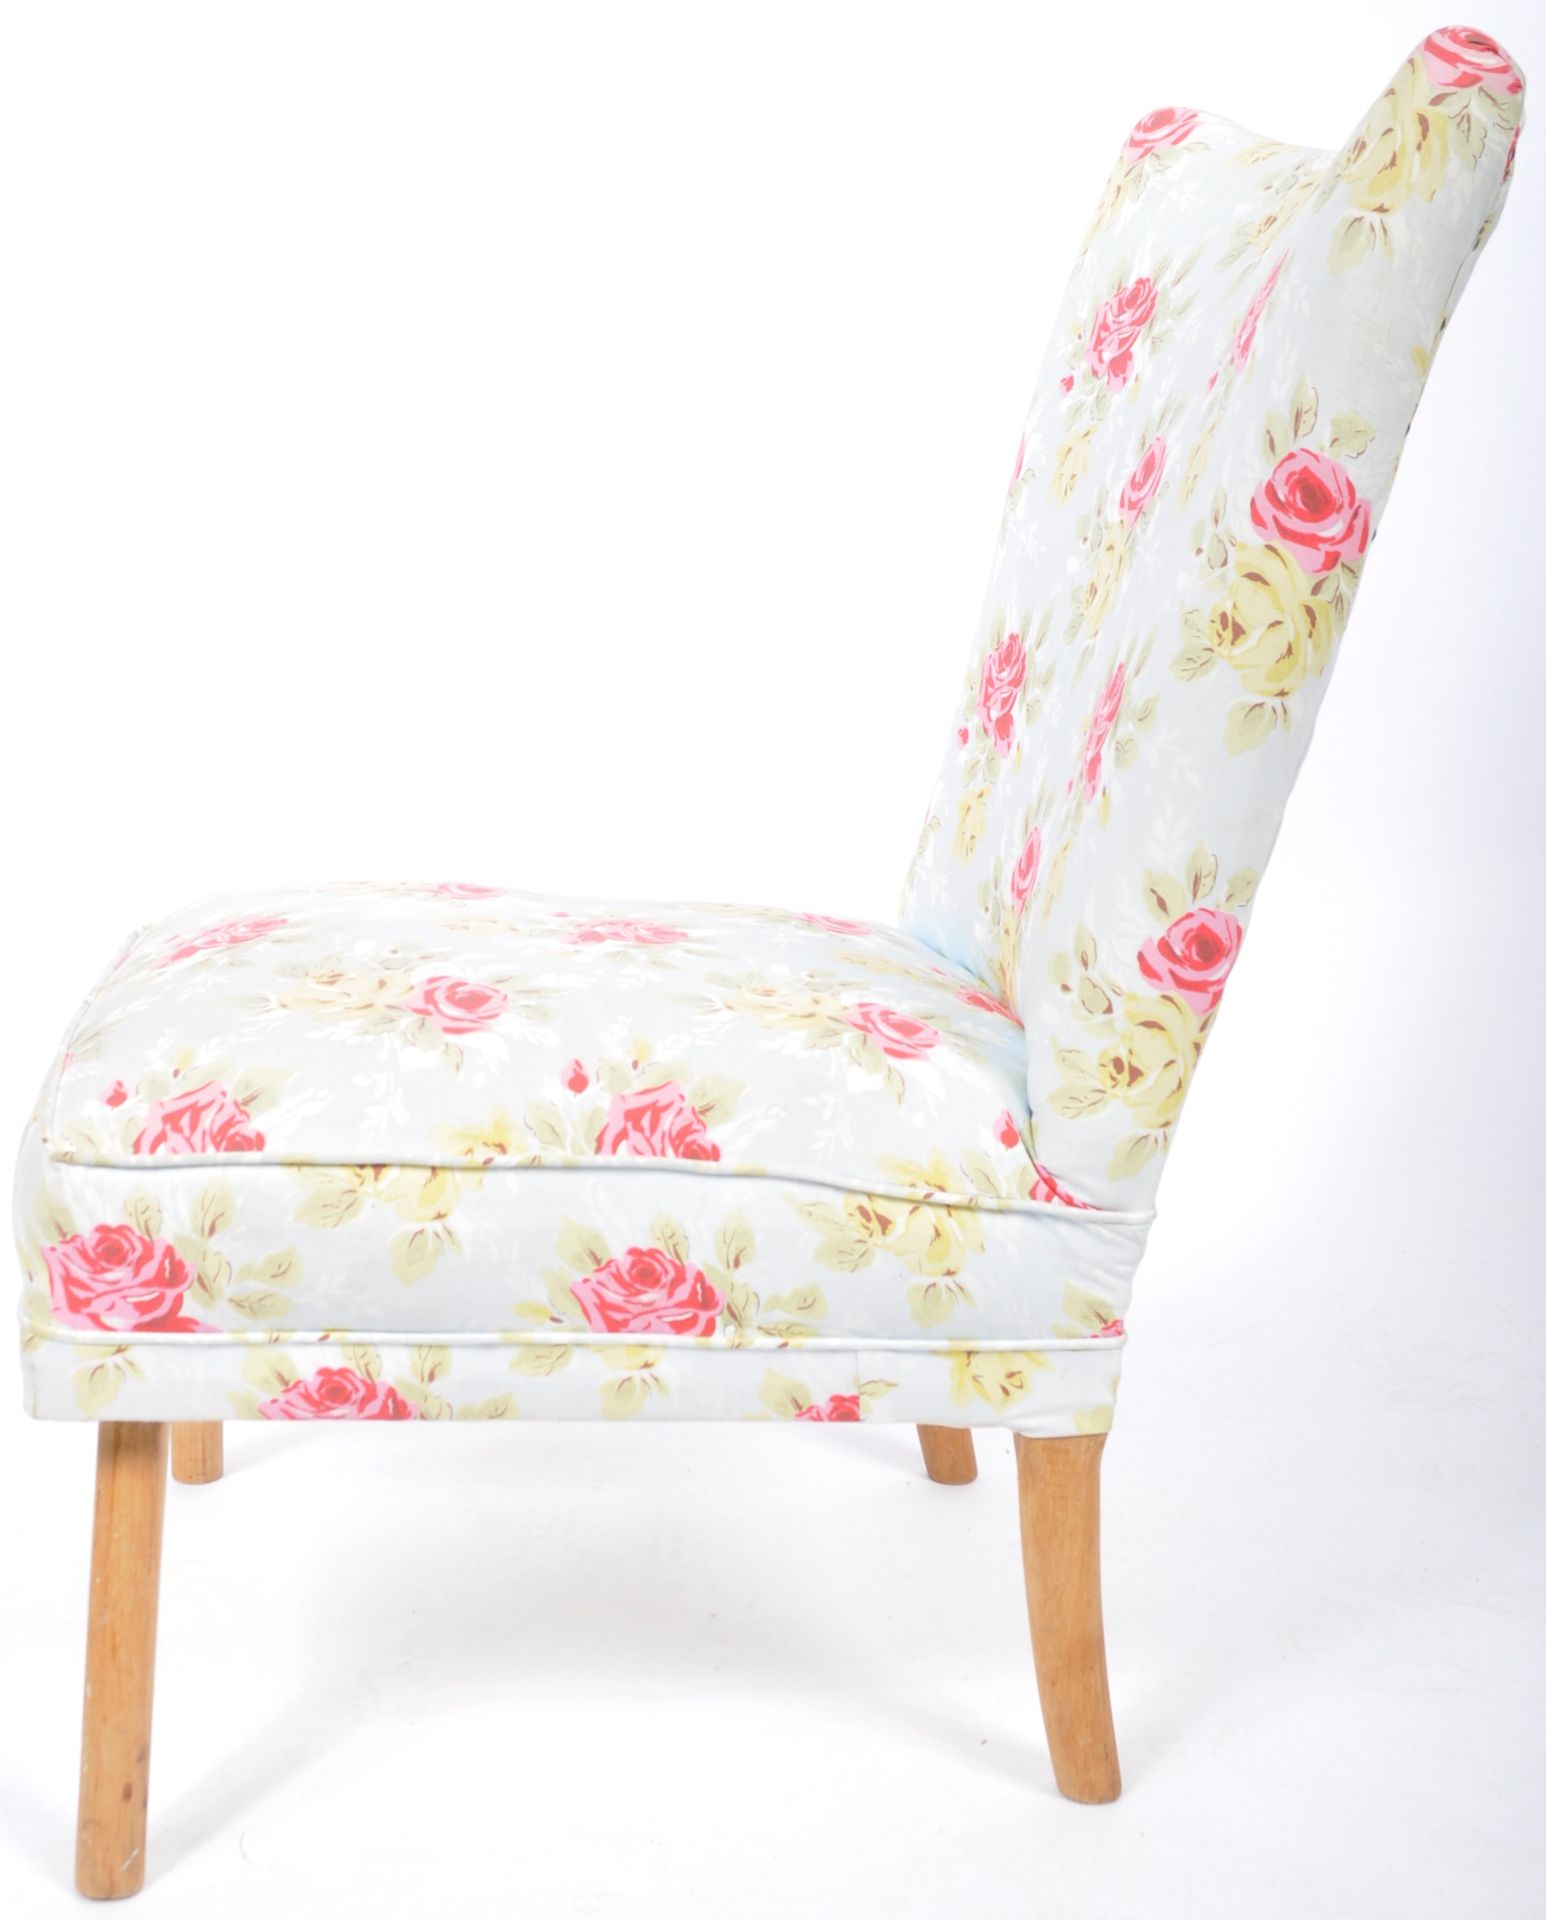 RETRO HOWARD KEITH MANNER LOW COCKTAIL CHAIR IN CATH KIDSTON UPHOLSTERY - Image 7 of 7